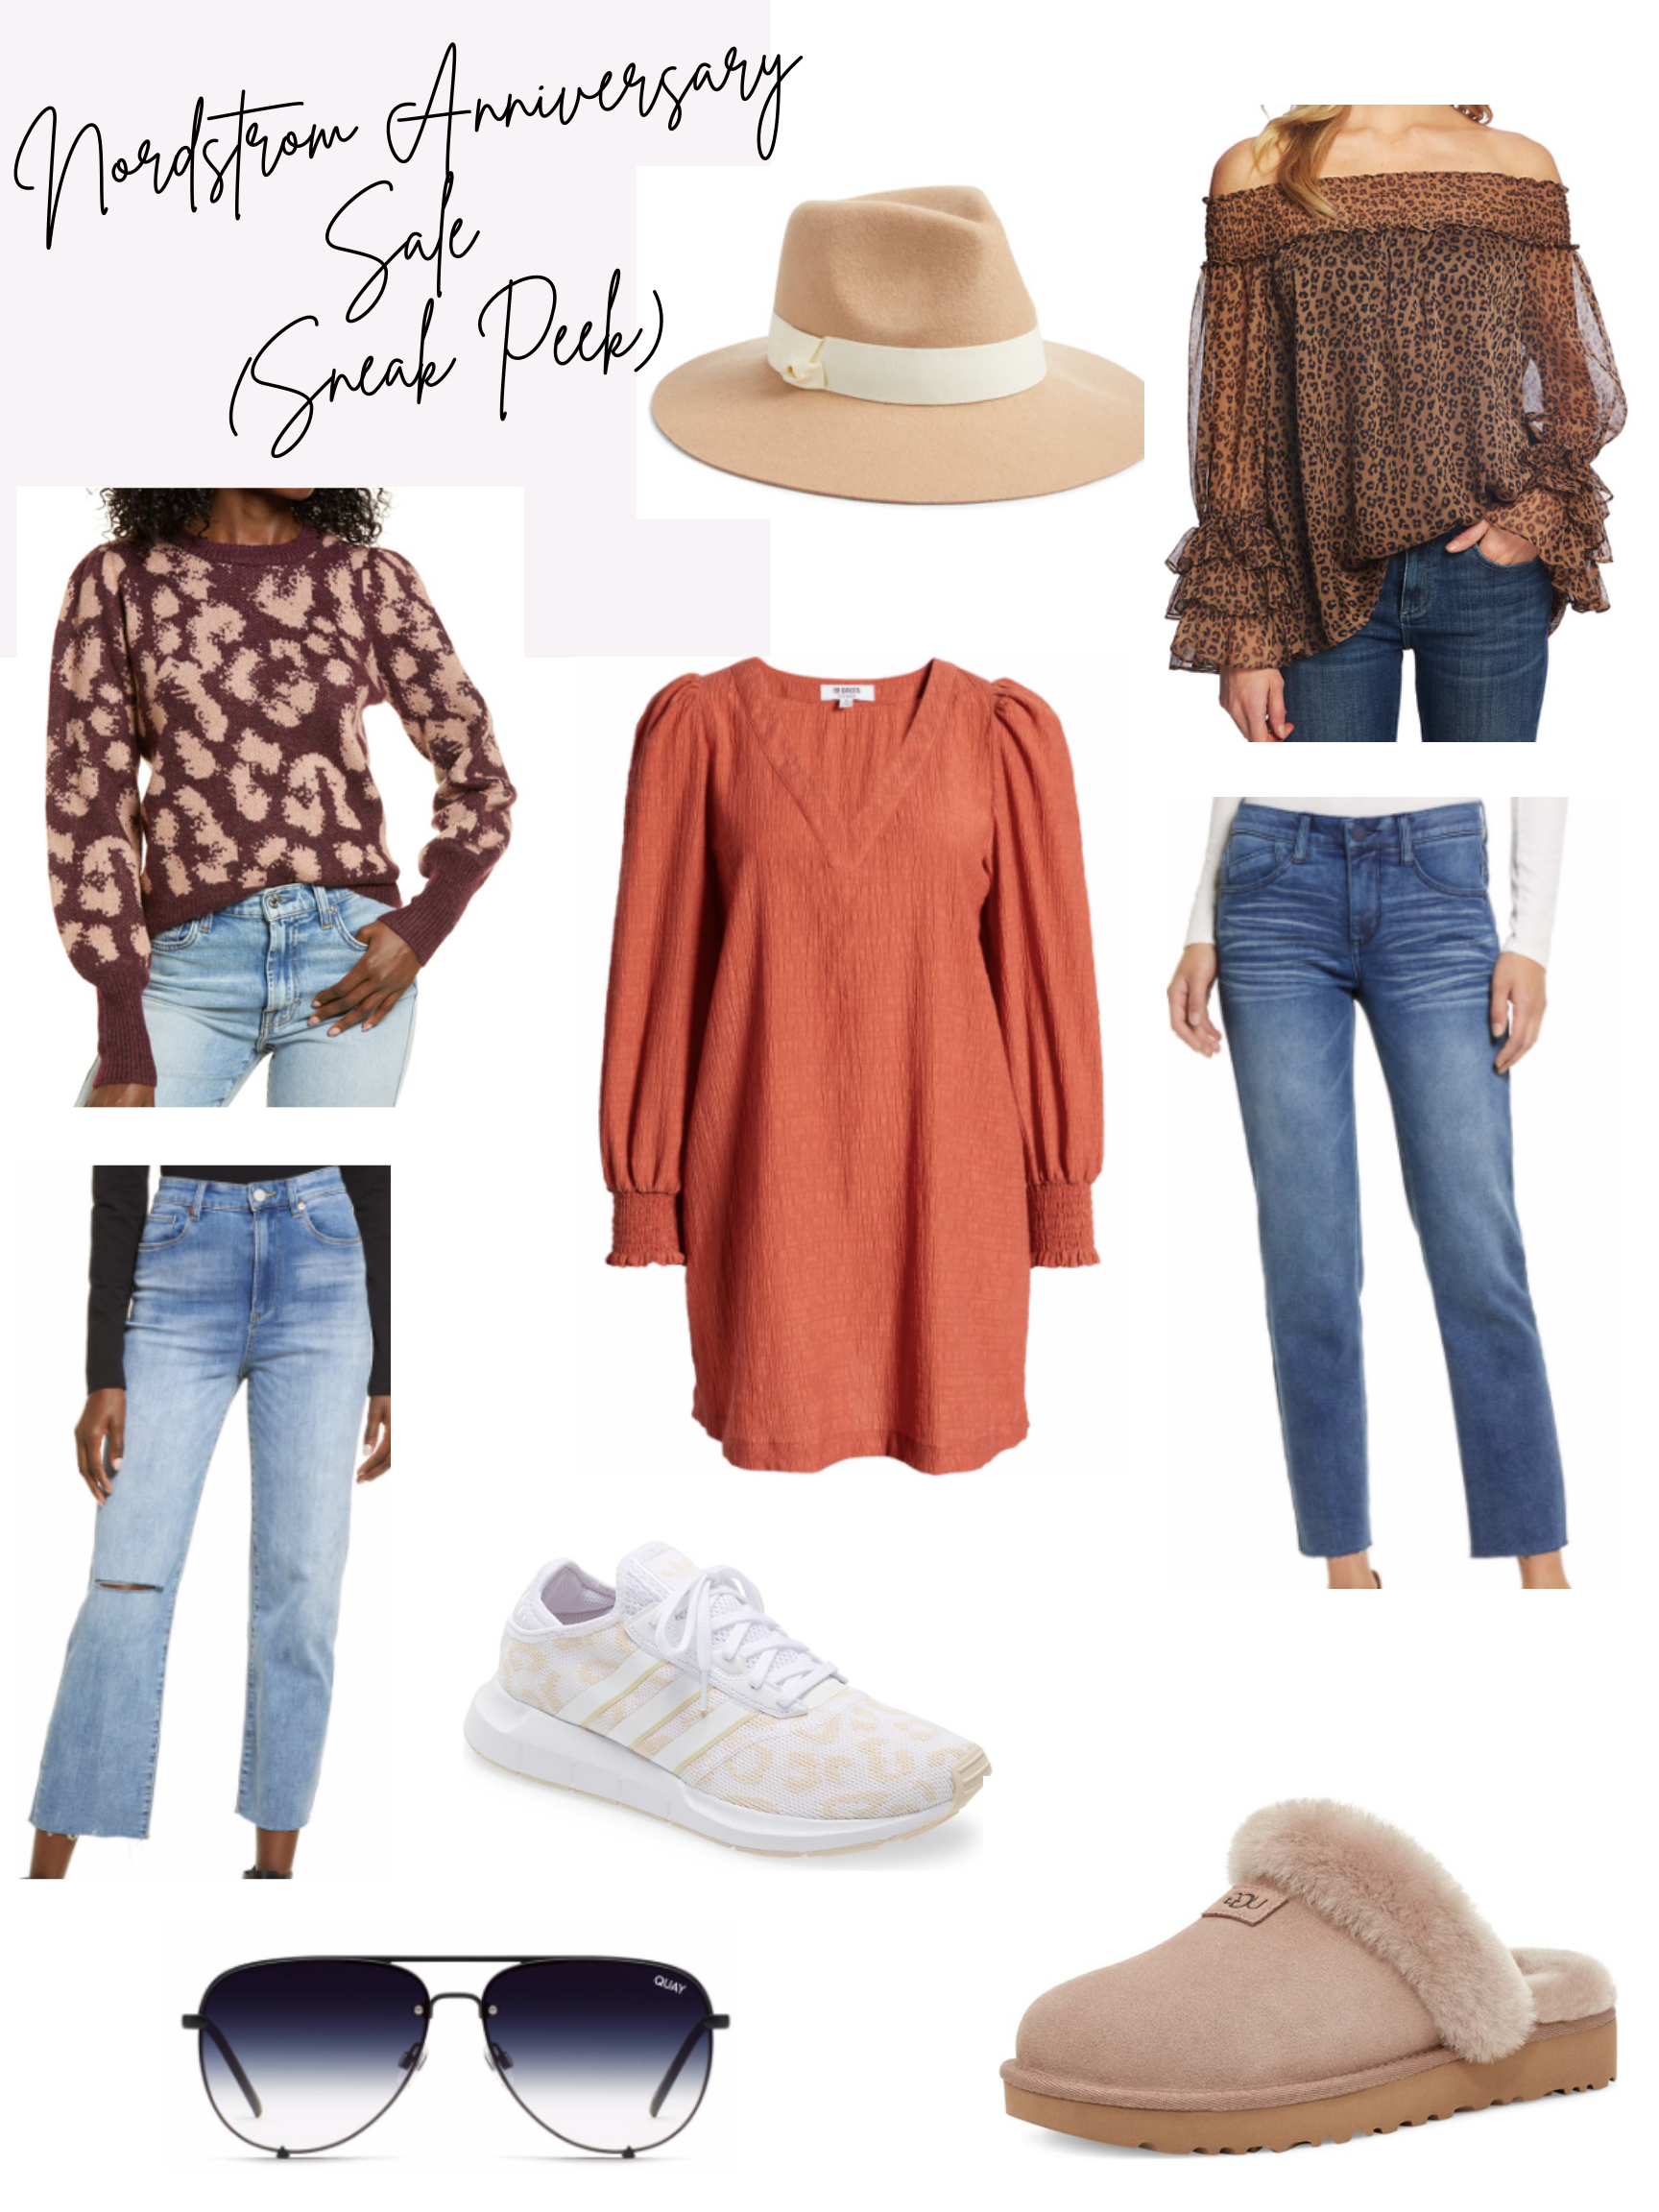 Your Complete Guide For Shopping The Nordstrom Anniversary Sale 2021 + Giveaway!